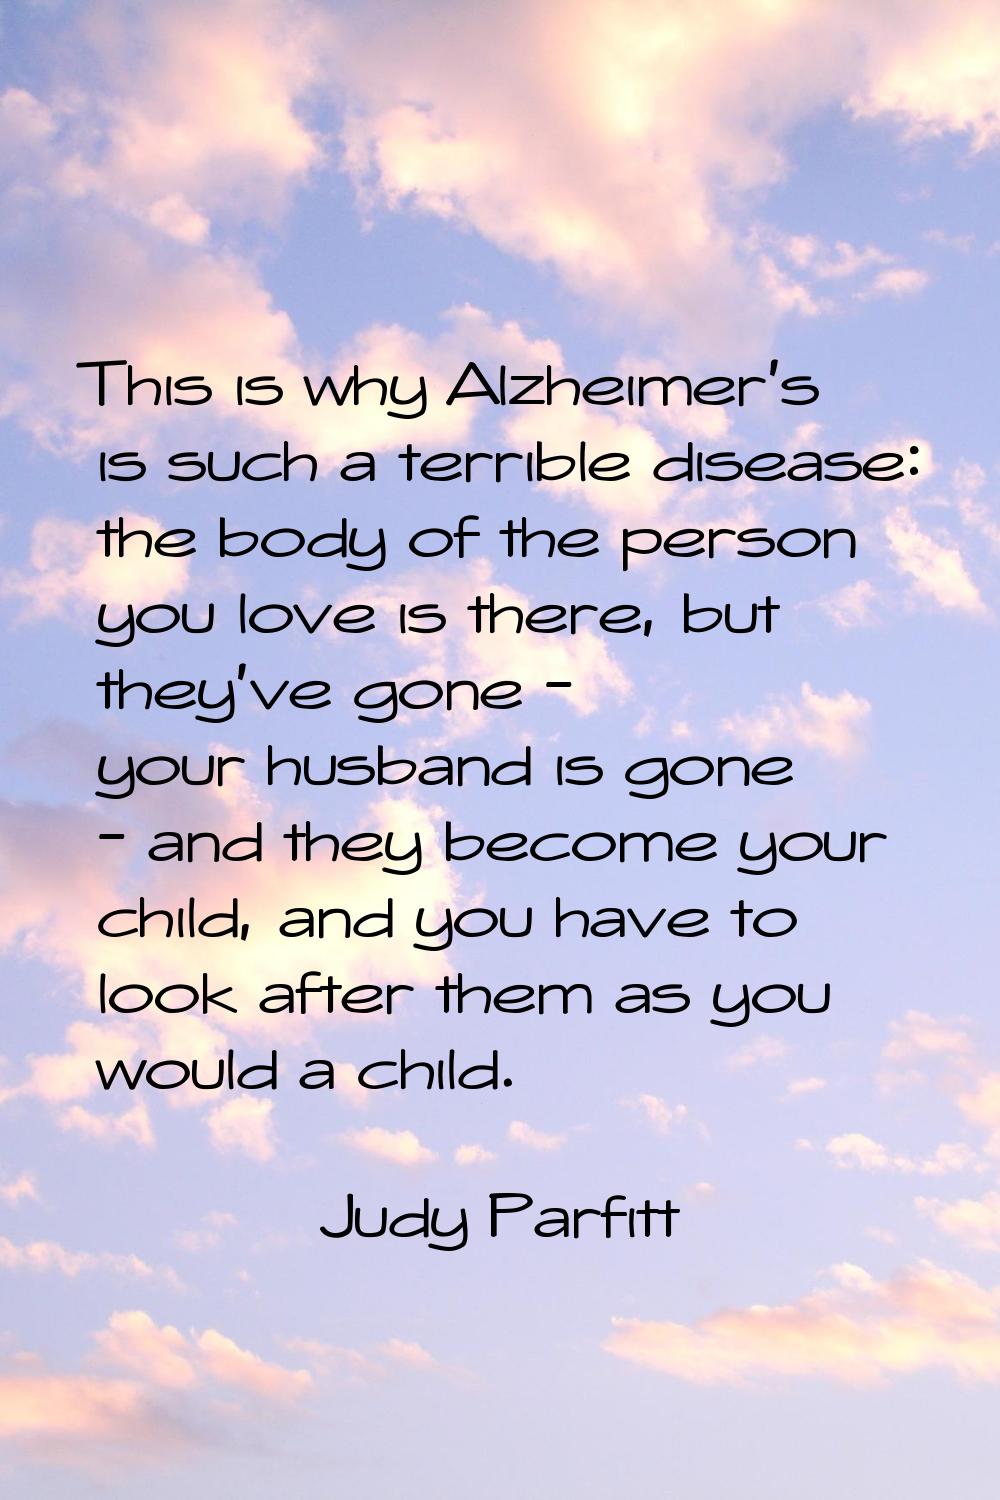 This is why Alzheimer's is such a terrible disease: the body of the person you love is there, but t